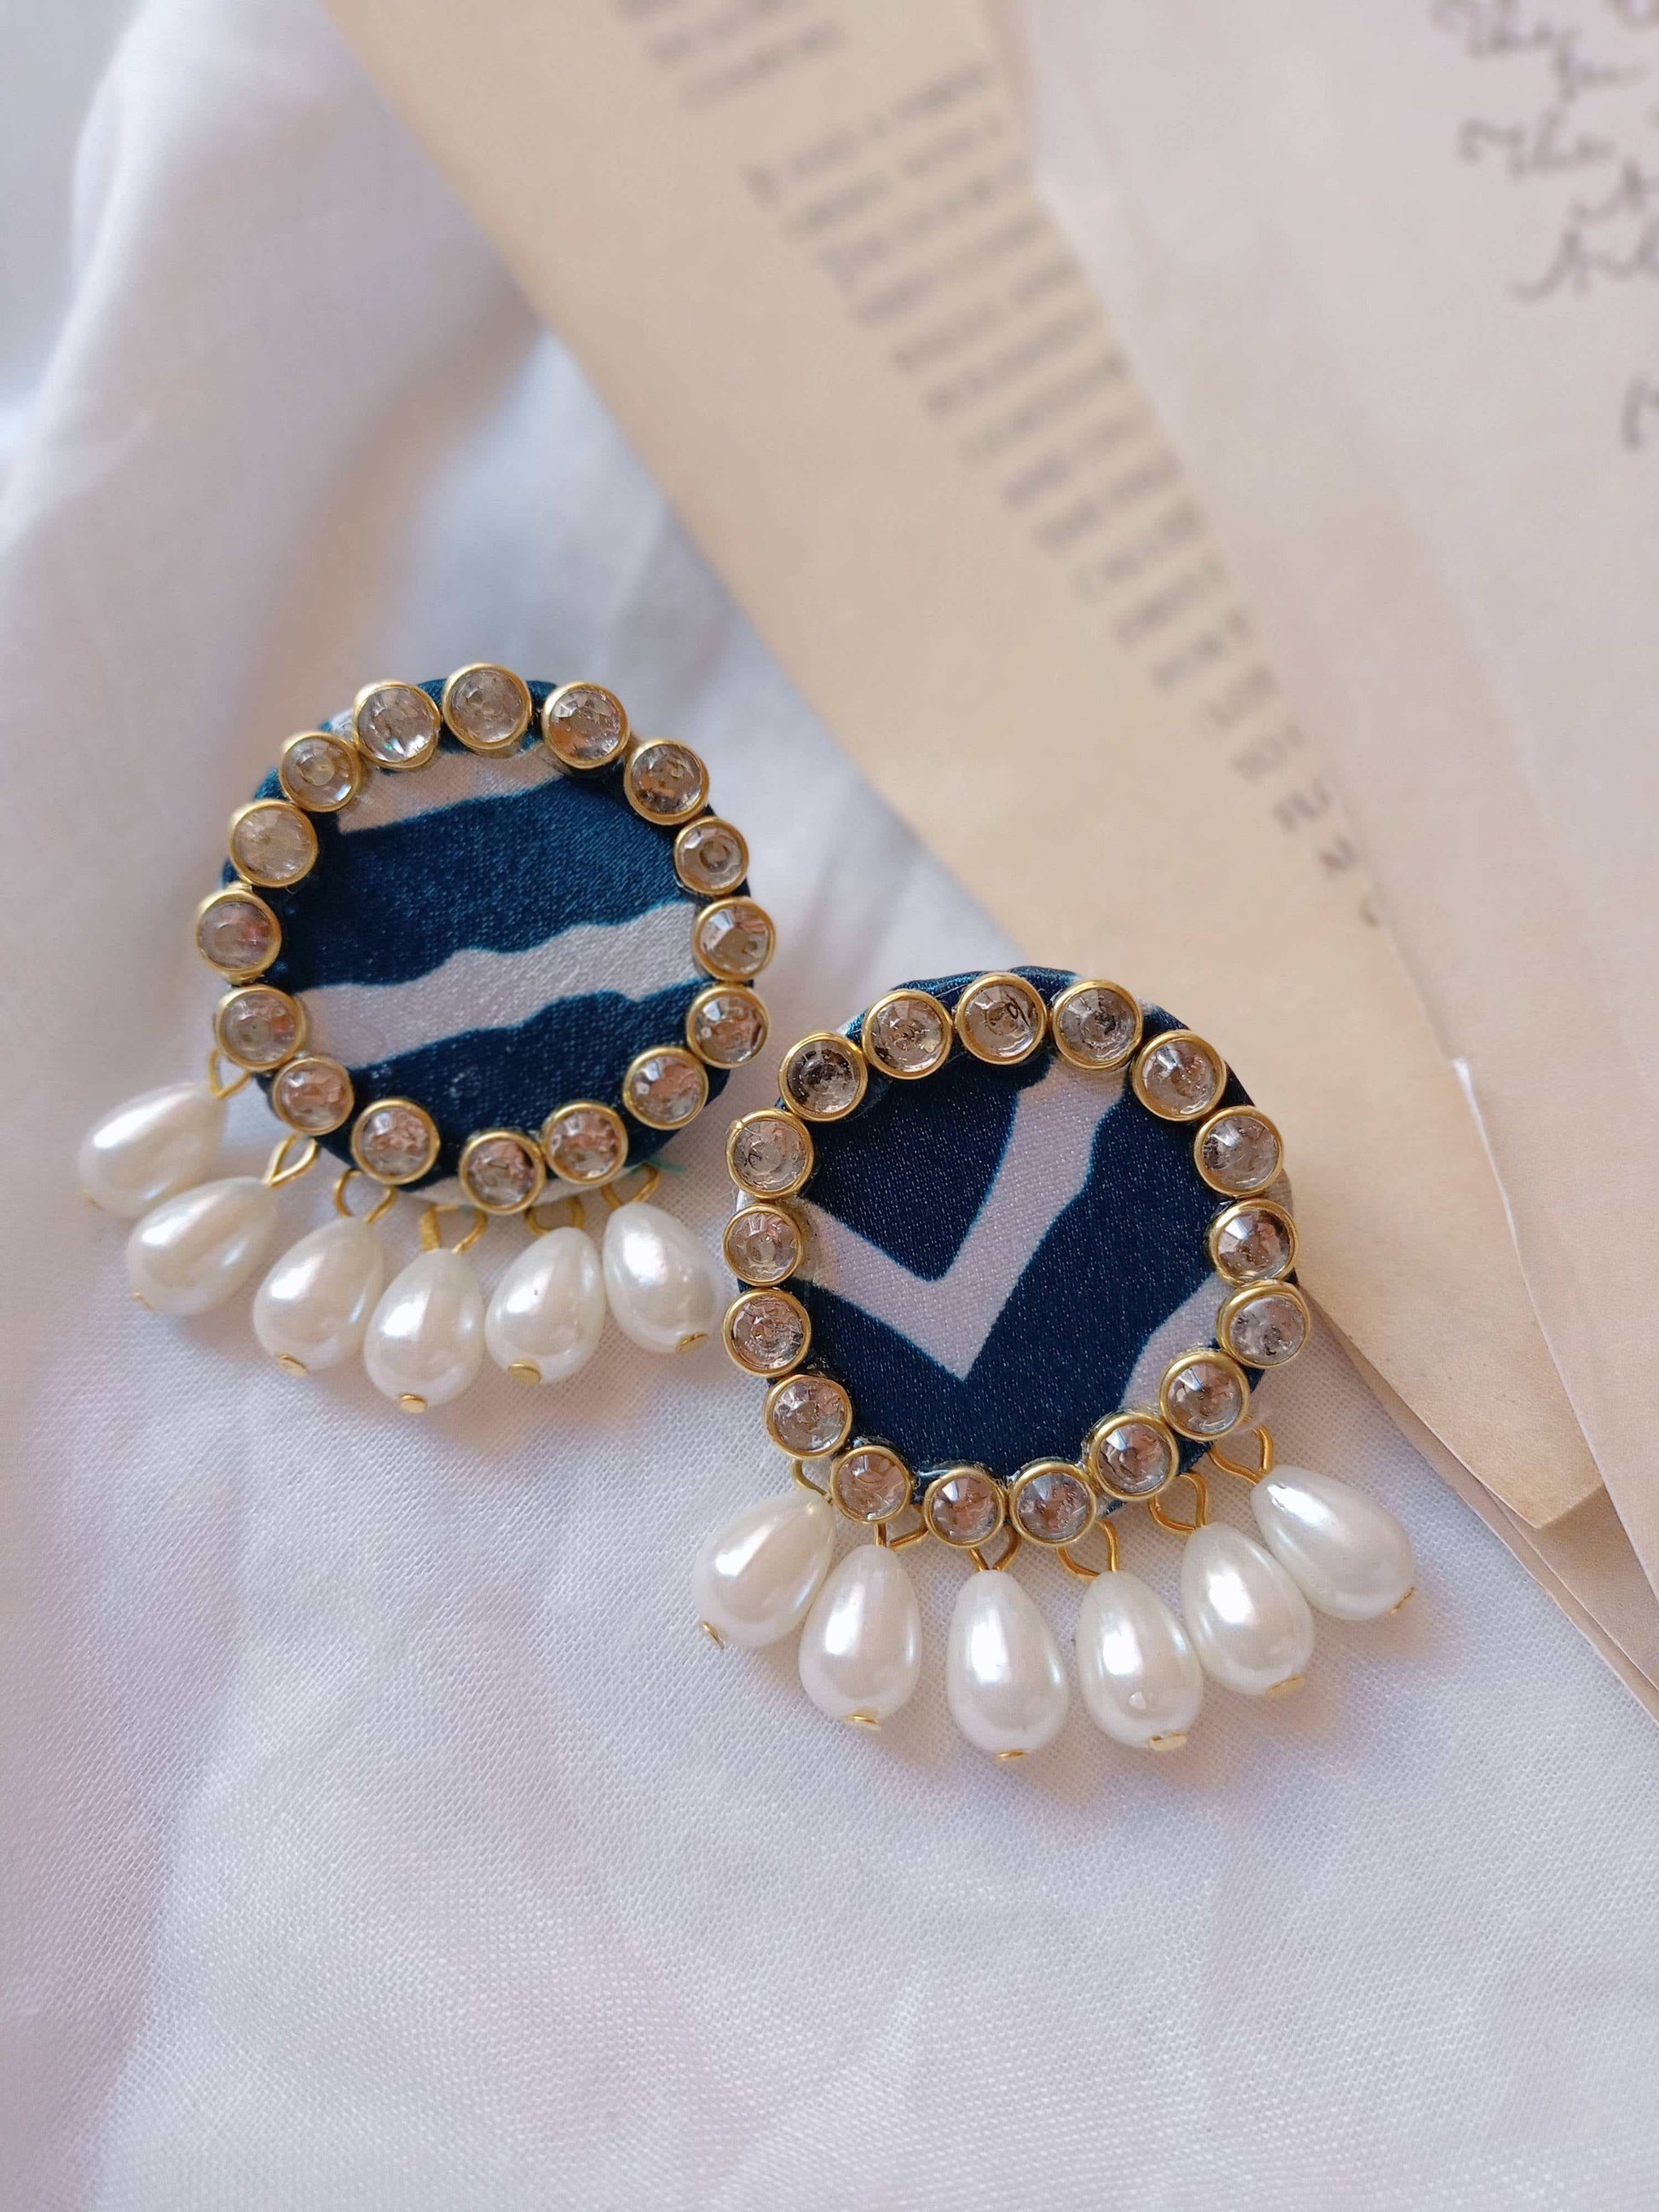 Blue printed round studs earrings with kundan border and white pearls on white backdrop